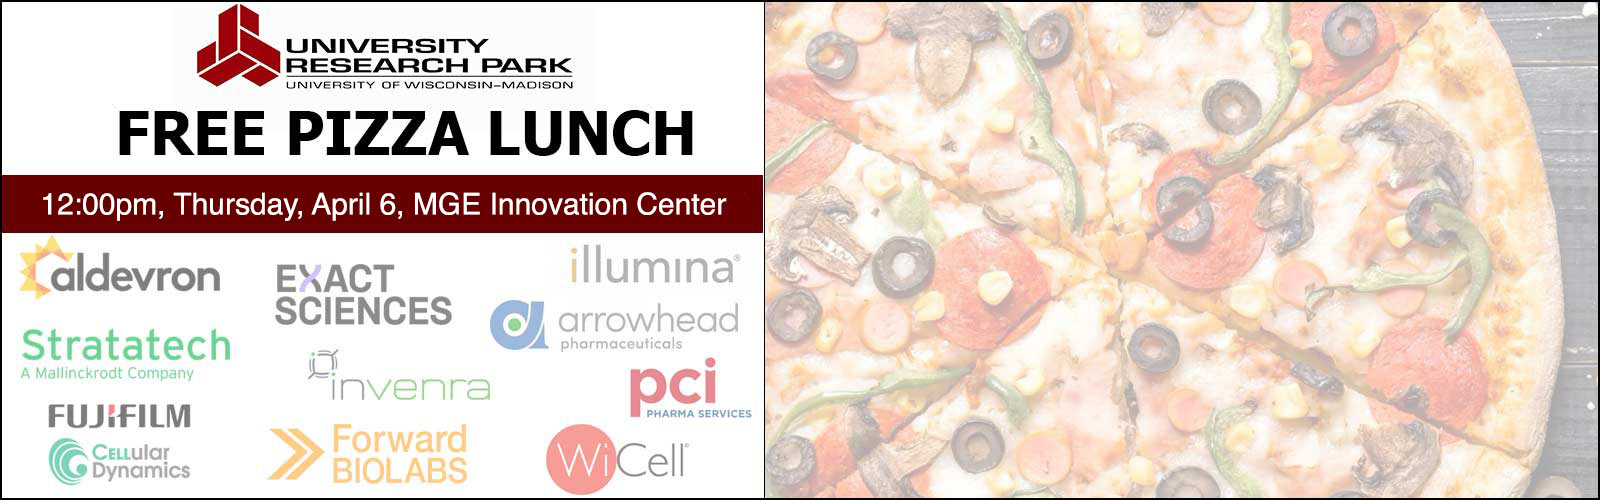 masthead image for University Research Park Free Pizza Lunch at Noon on Wednesday, April 5